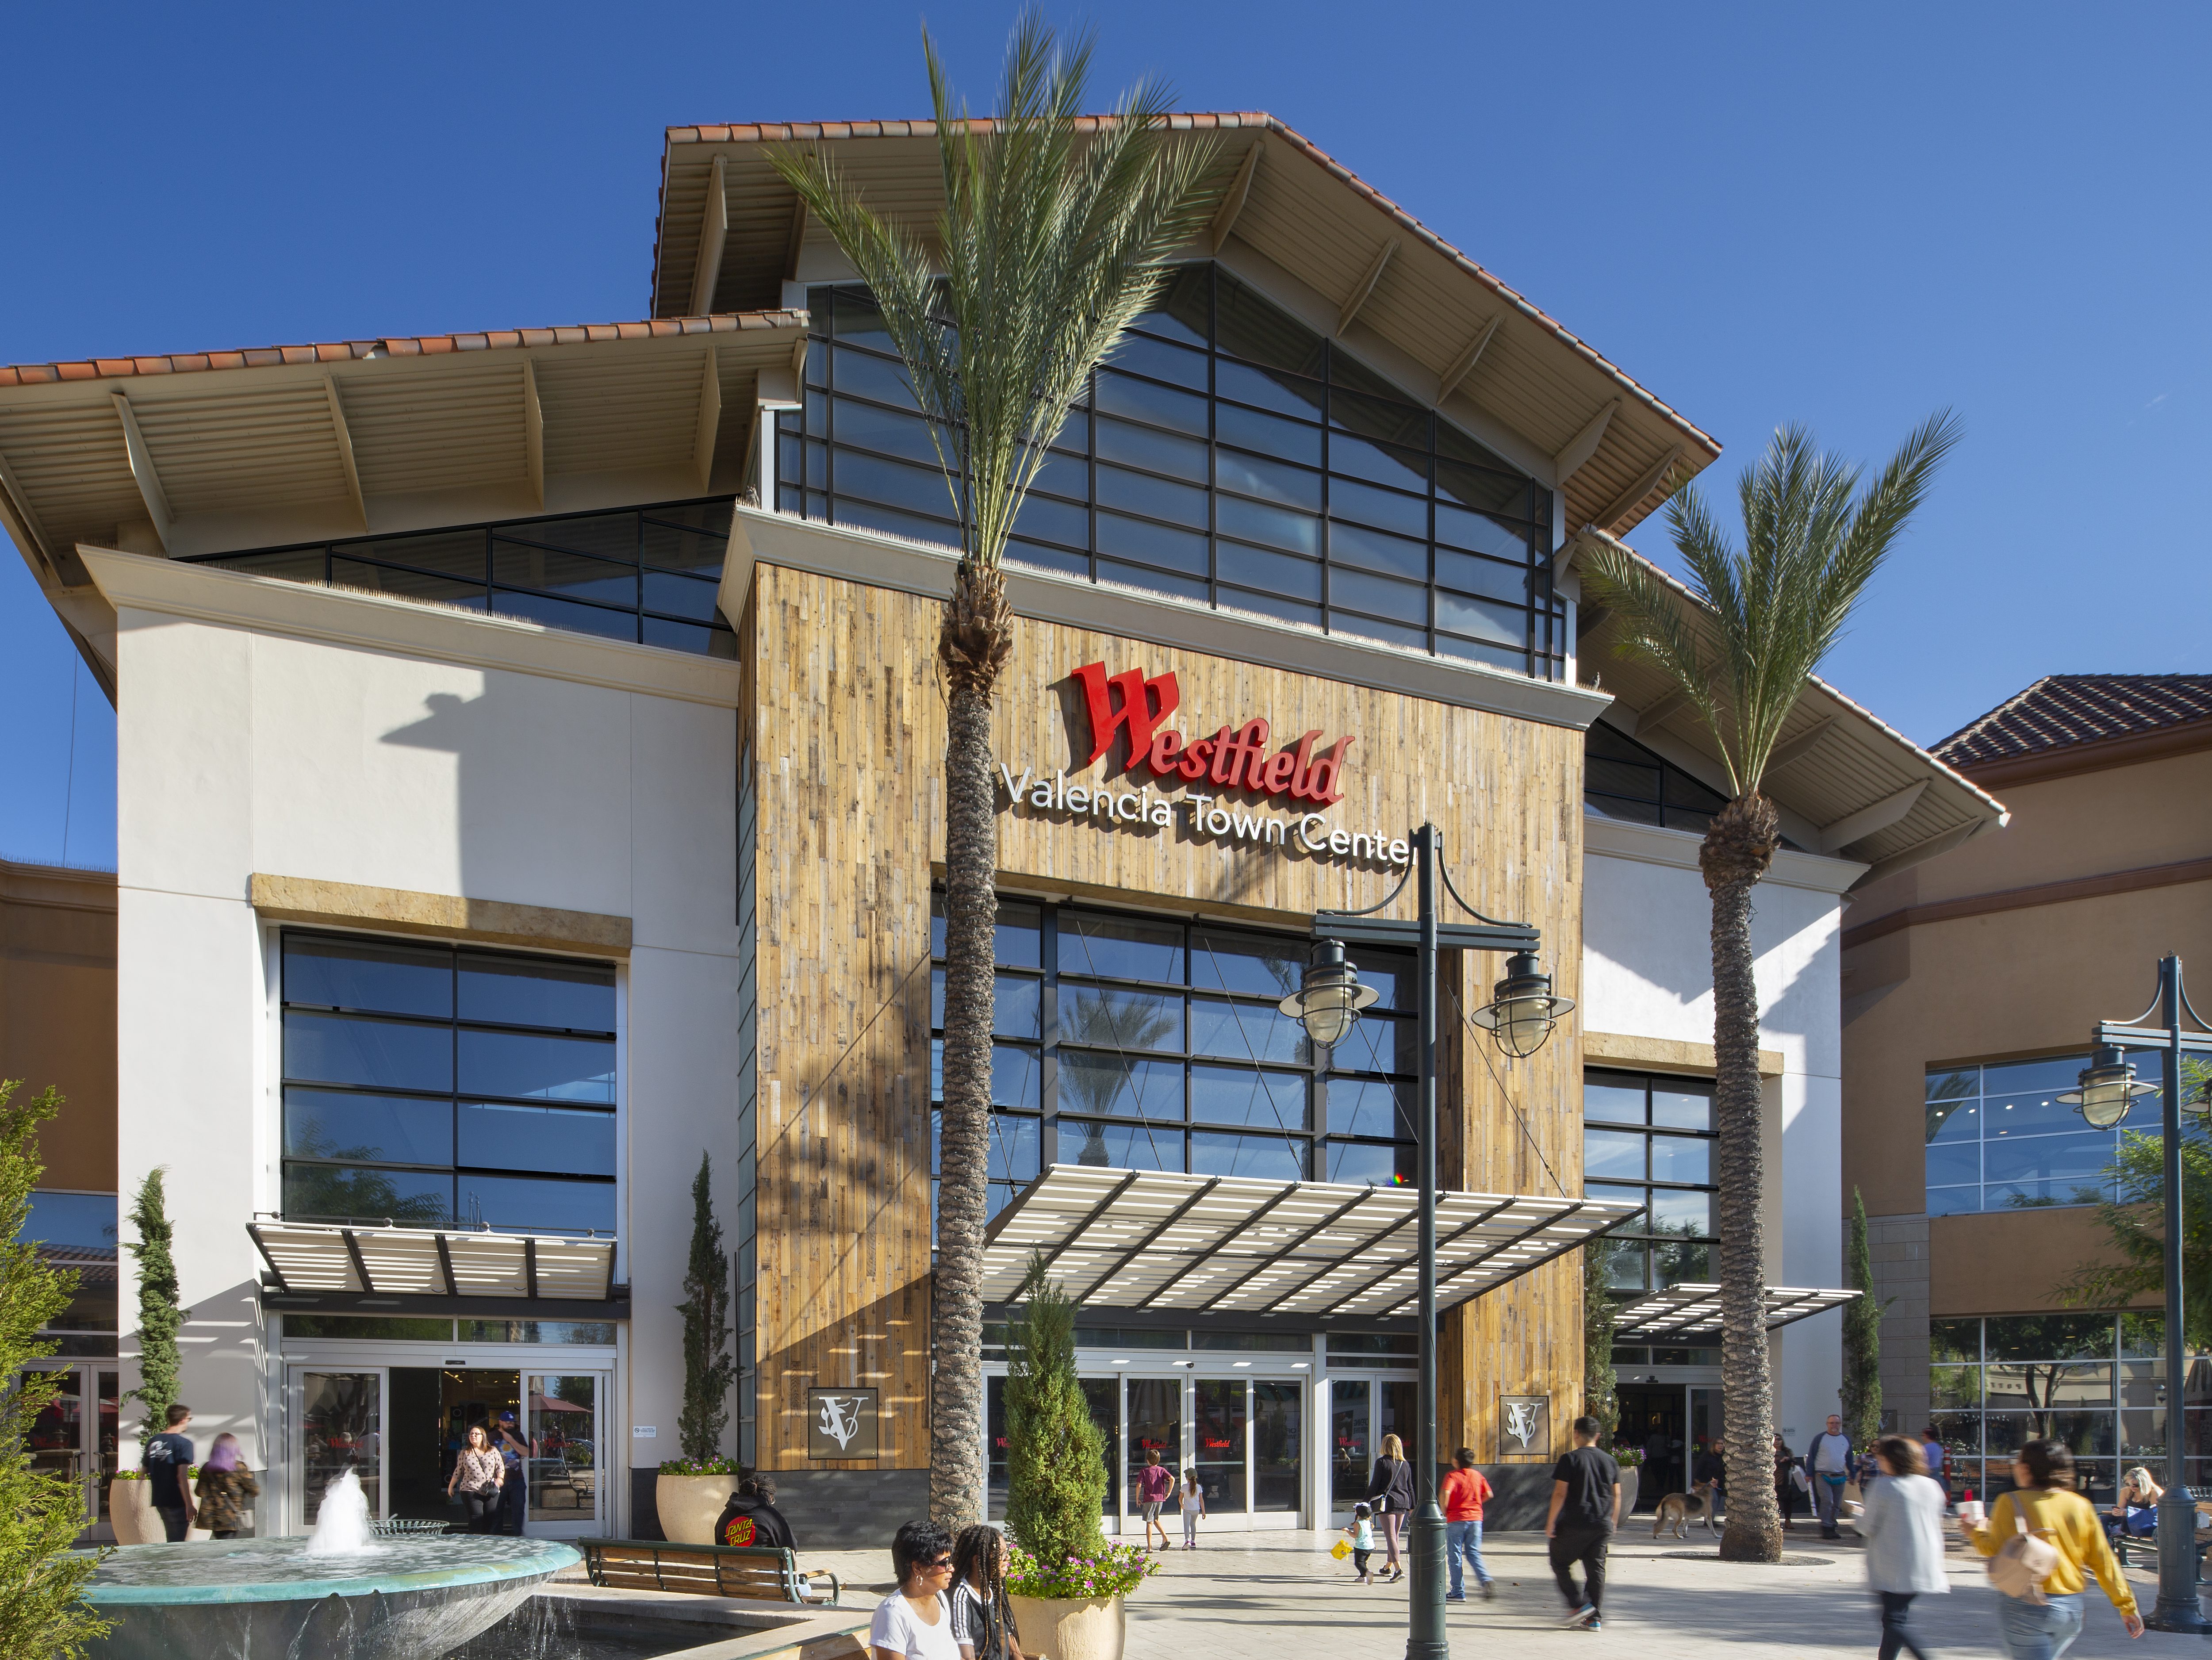 Westfield sells Mission Valley shopping centers in San Diego for